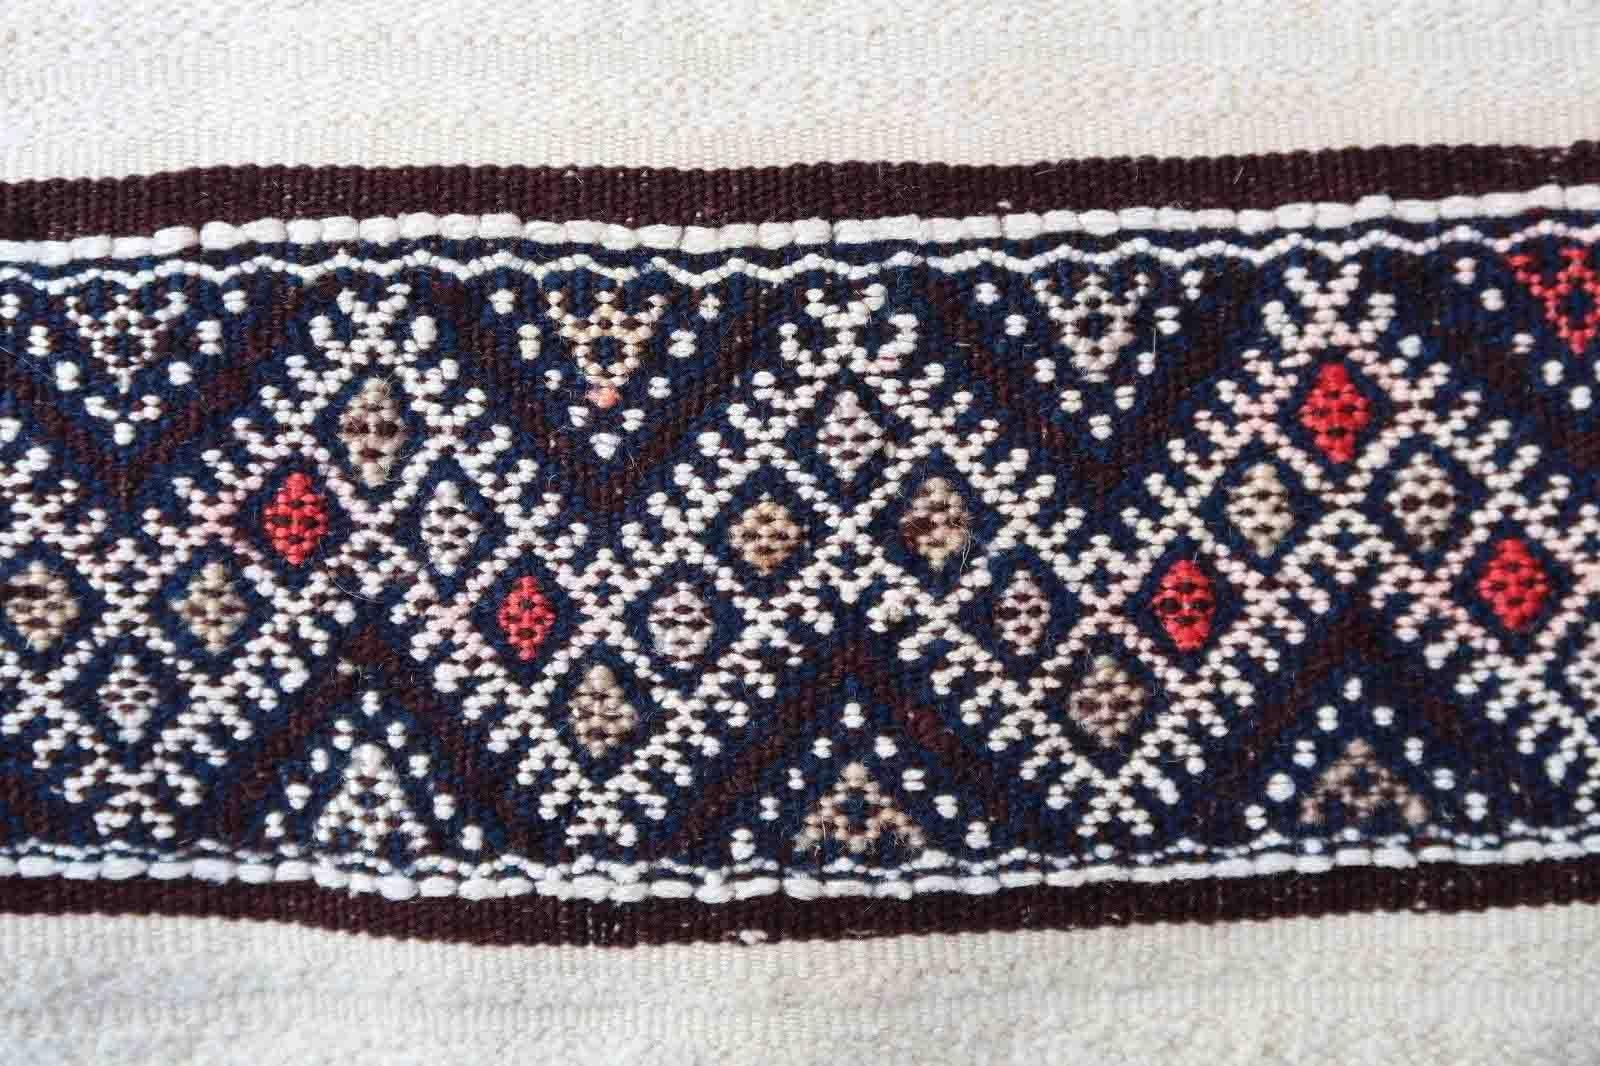 Handmade vintage Moroccan woolen kilim in stripes. This flatweave is from the middle of 20th century in original good condition.

-condition: original good,

-circa: 1950s,

-size: 3.8' x 6.8' (118cm x 210cm),

-material: wool,

-country